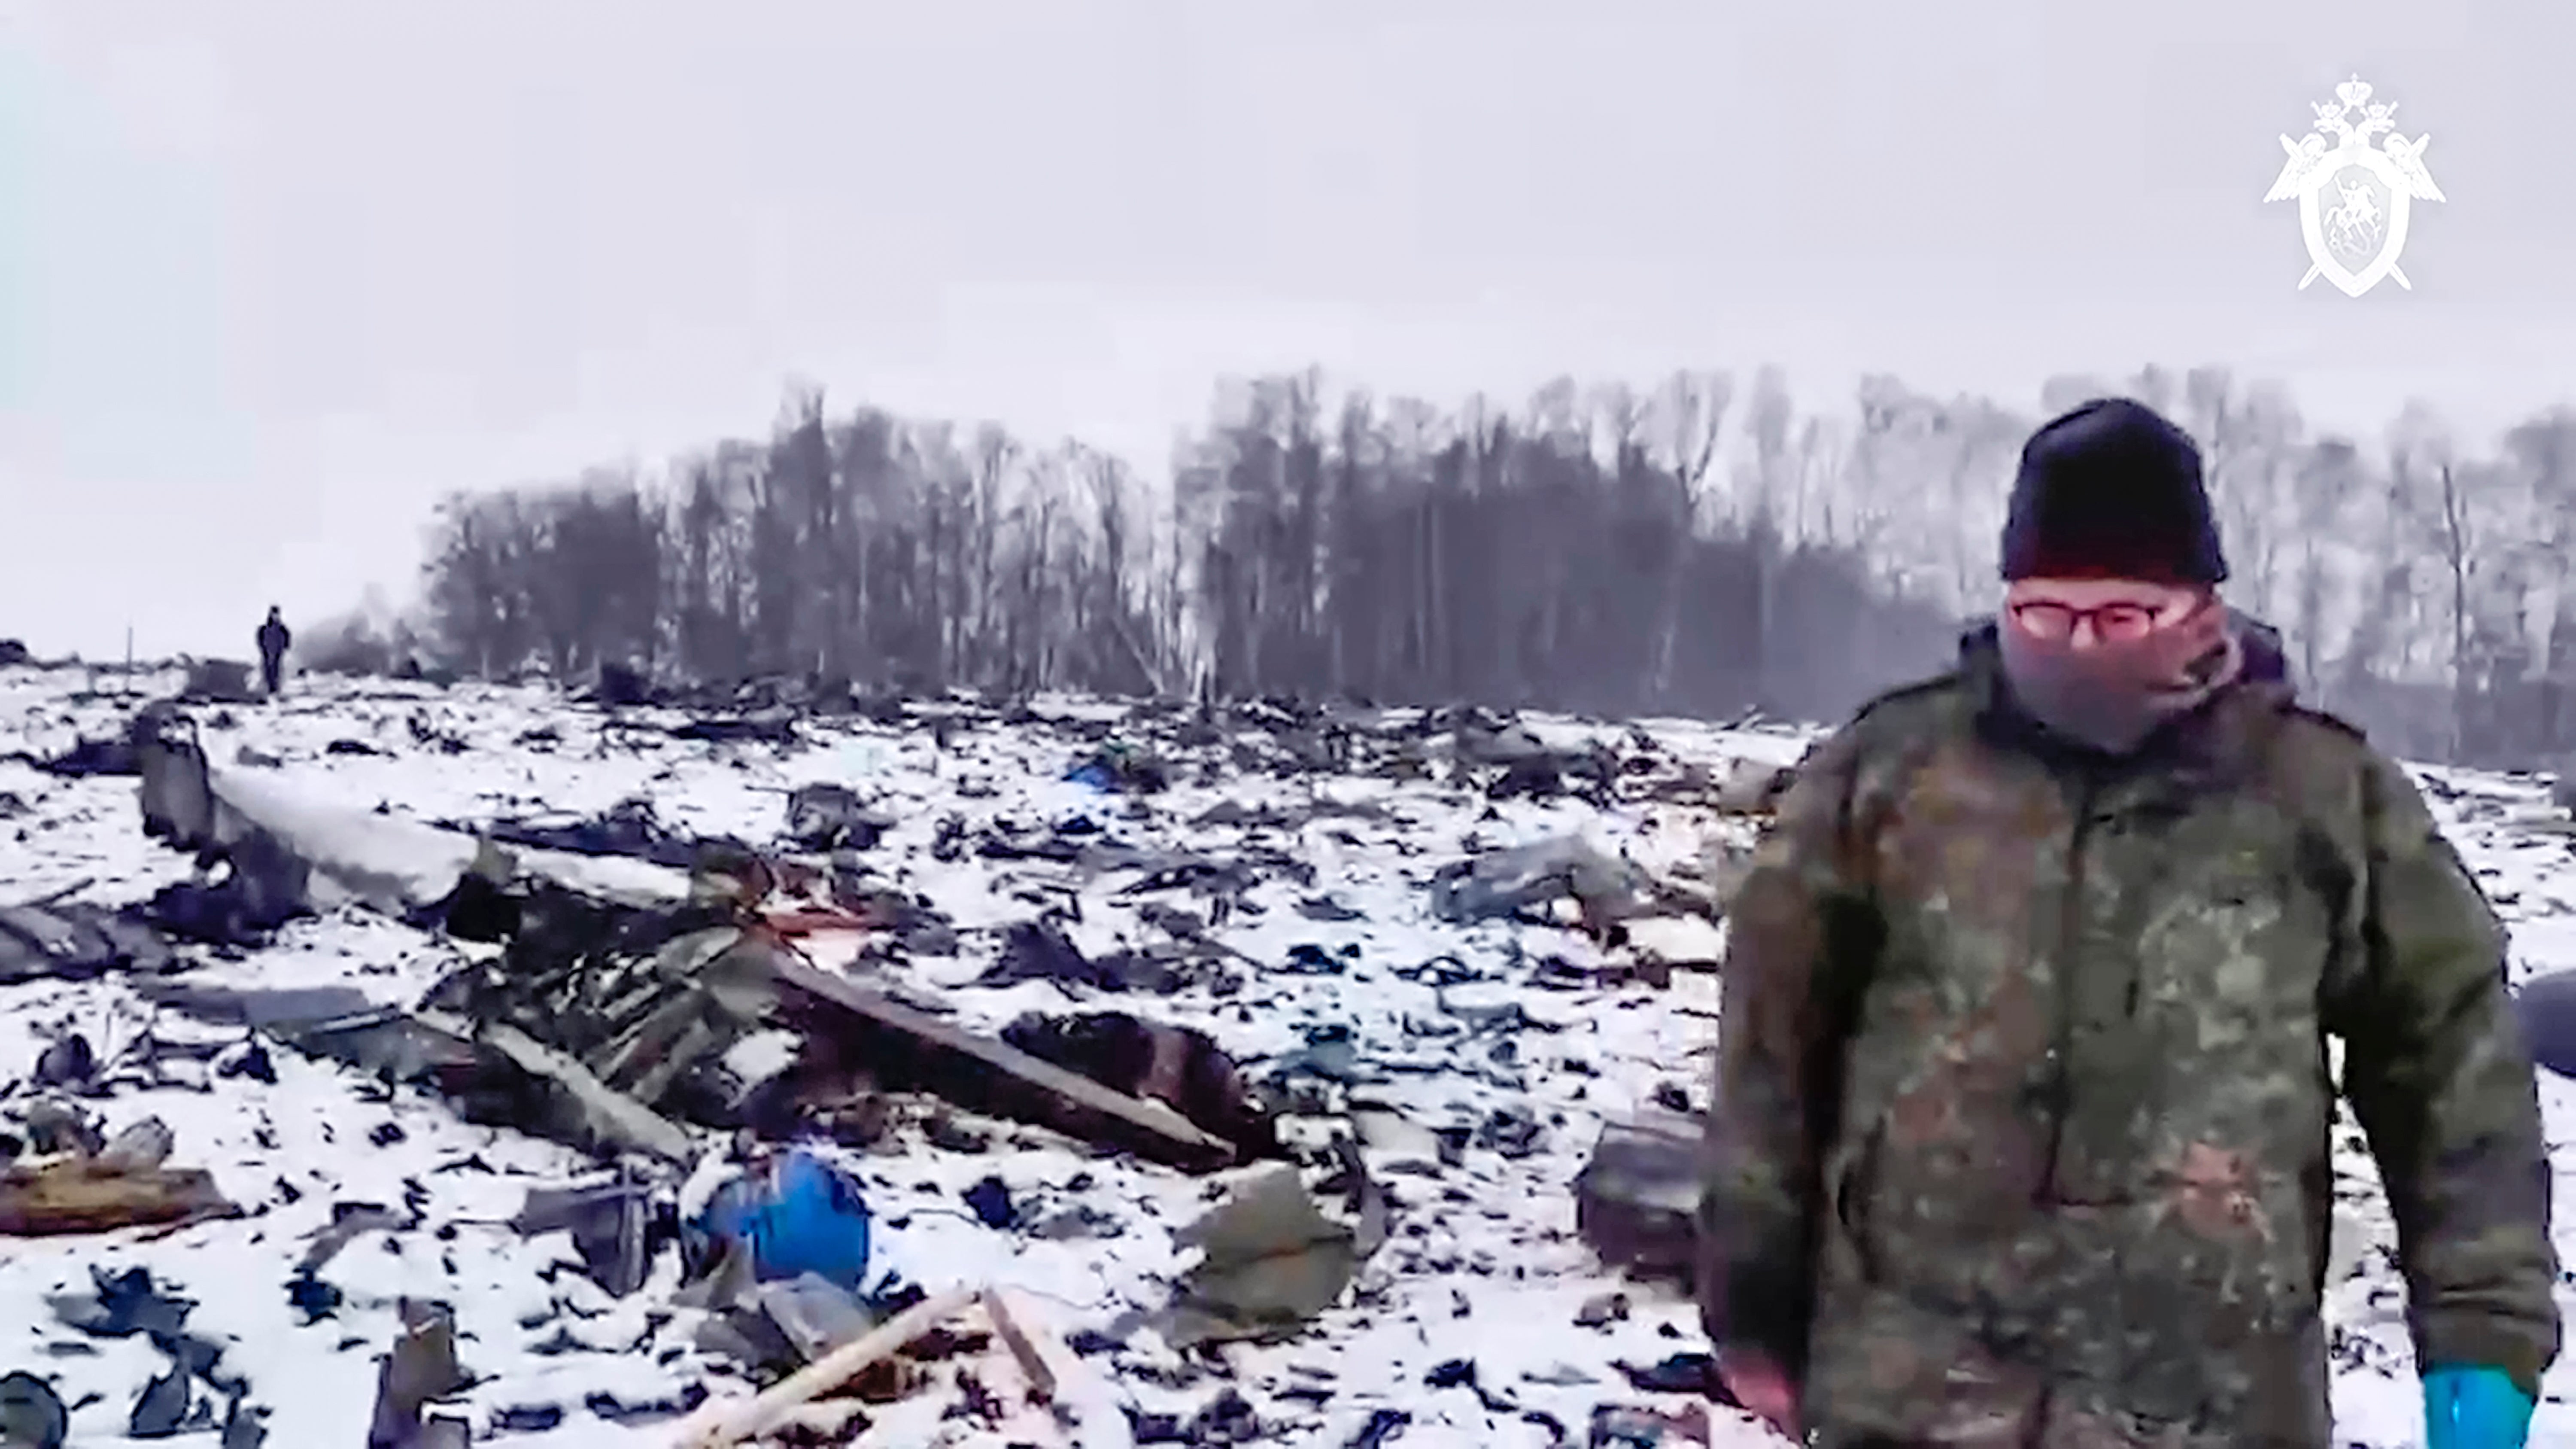 A Russian Investigative Committee employee walks near the wreckage of the Russian military Il-76 plane that crashed near Yablonovo, in the Belgorod region of Russia